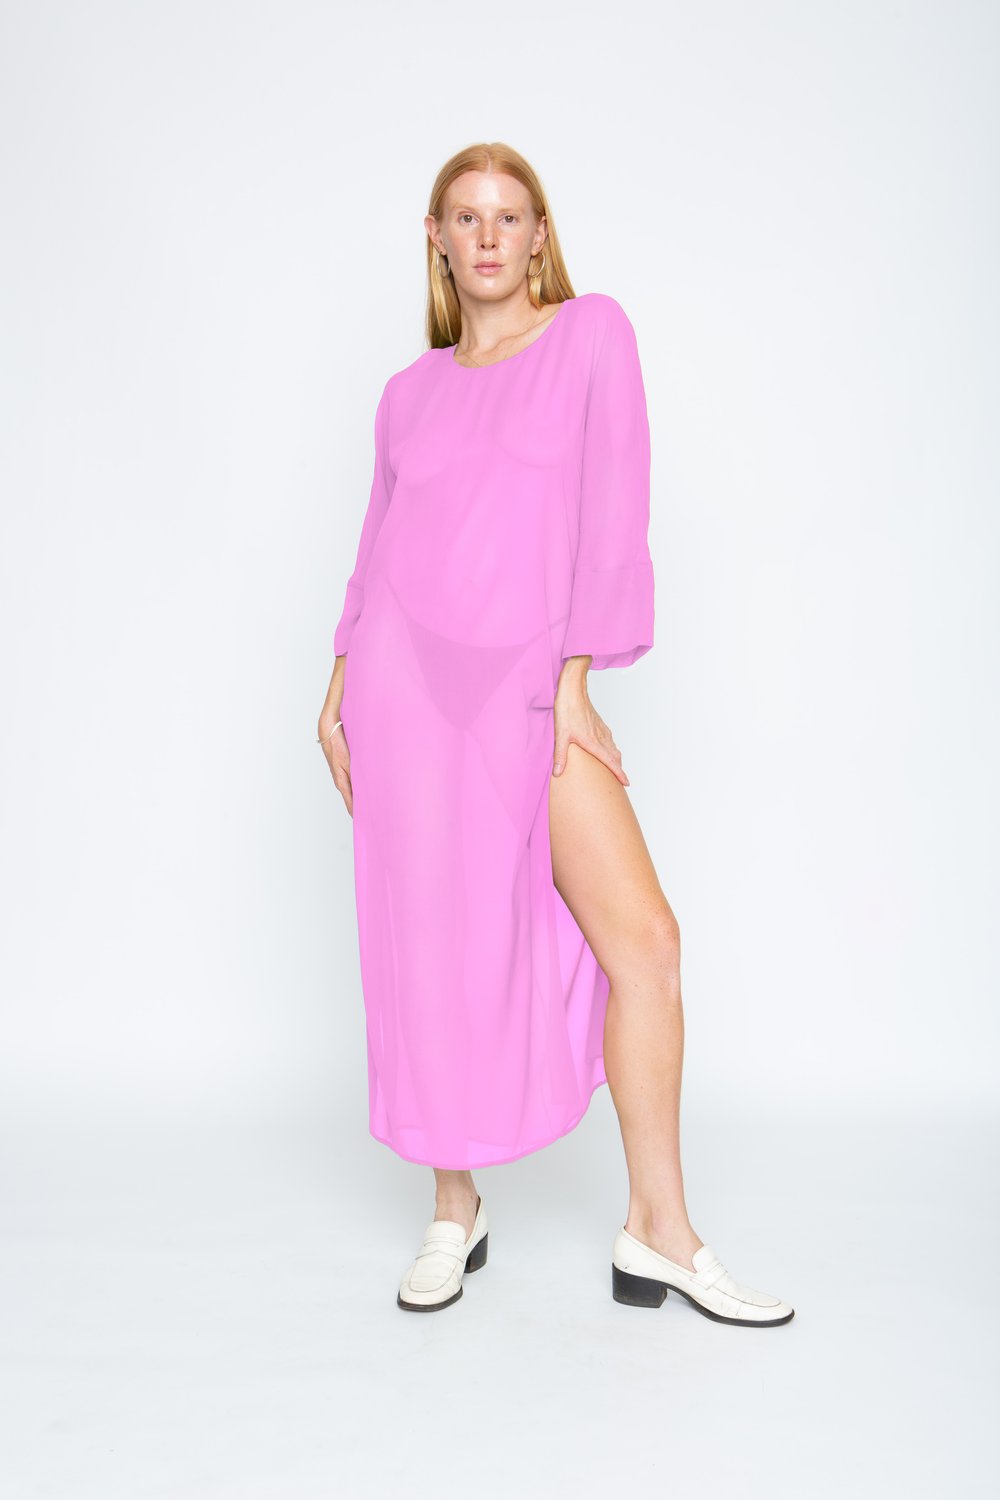 Lily Forbes - Cecily Tunic: Sweet Pea